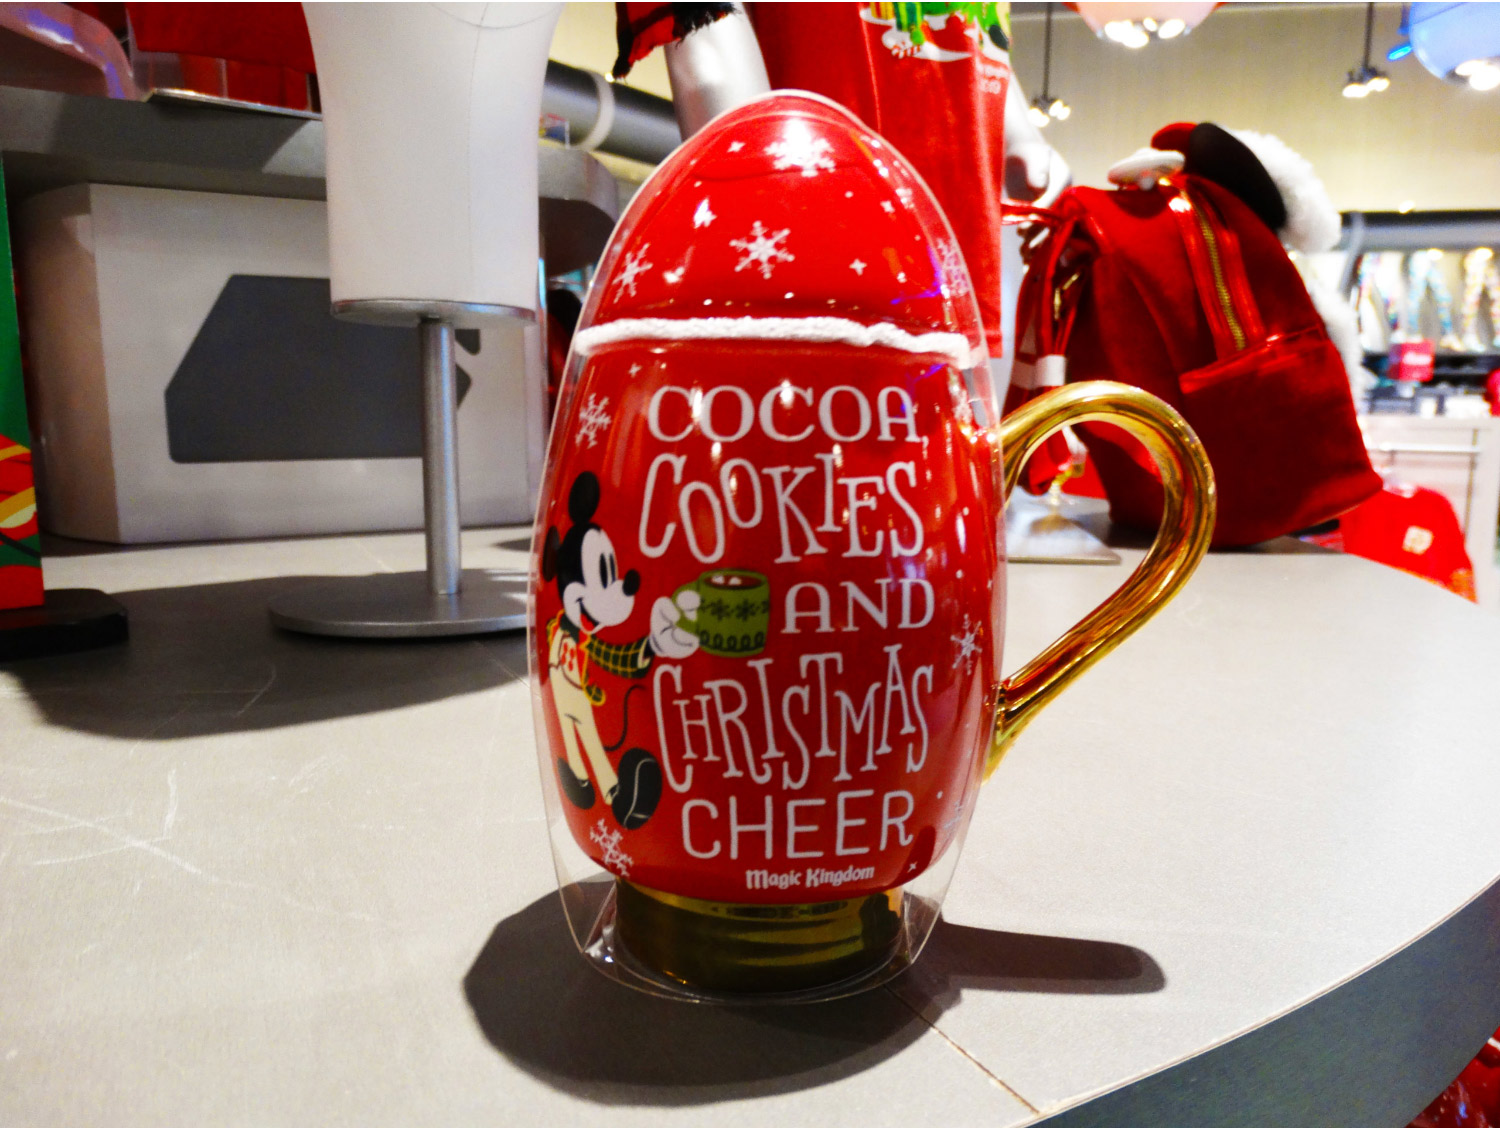 Front of Mickey's Very Merry Christmas Party Mug on shelf, reading "Cocoa, Cookies, And Christmas Cheer, Magic Kingdom®" with Mickey Mouse holding a cup of cocoa on the left of the text, snowflakes all over the mug. Lake Buena Vista, Florida.